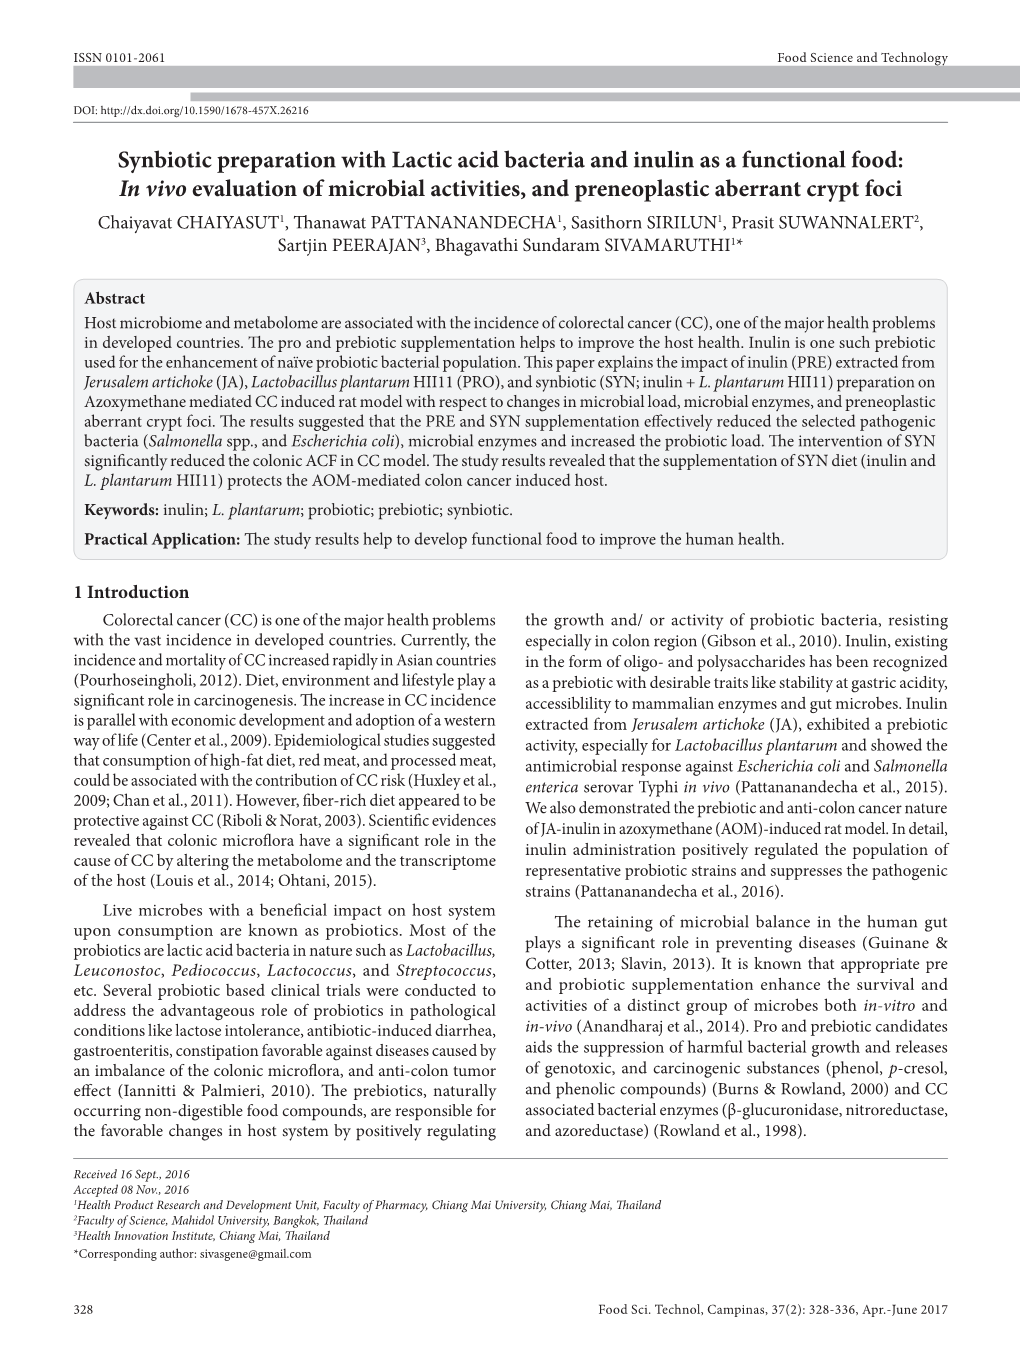 Synbiotic Preparation with Lactic Acid Bacteria and Inulin As A